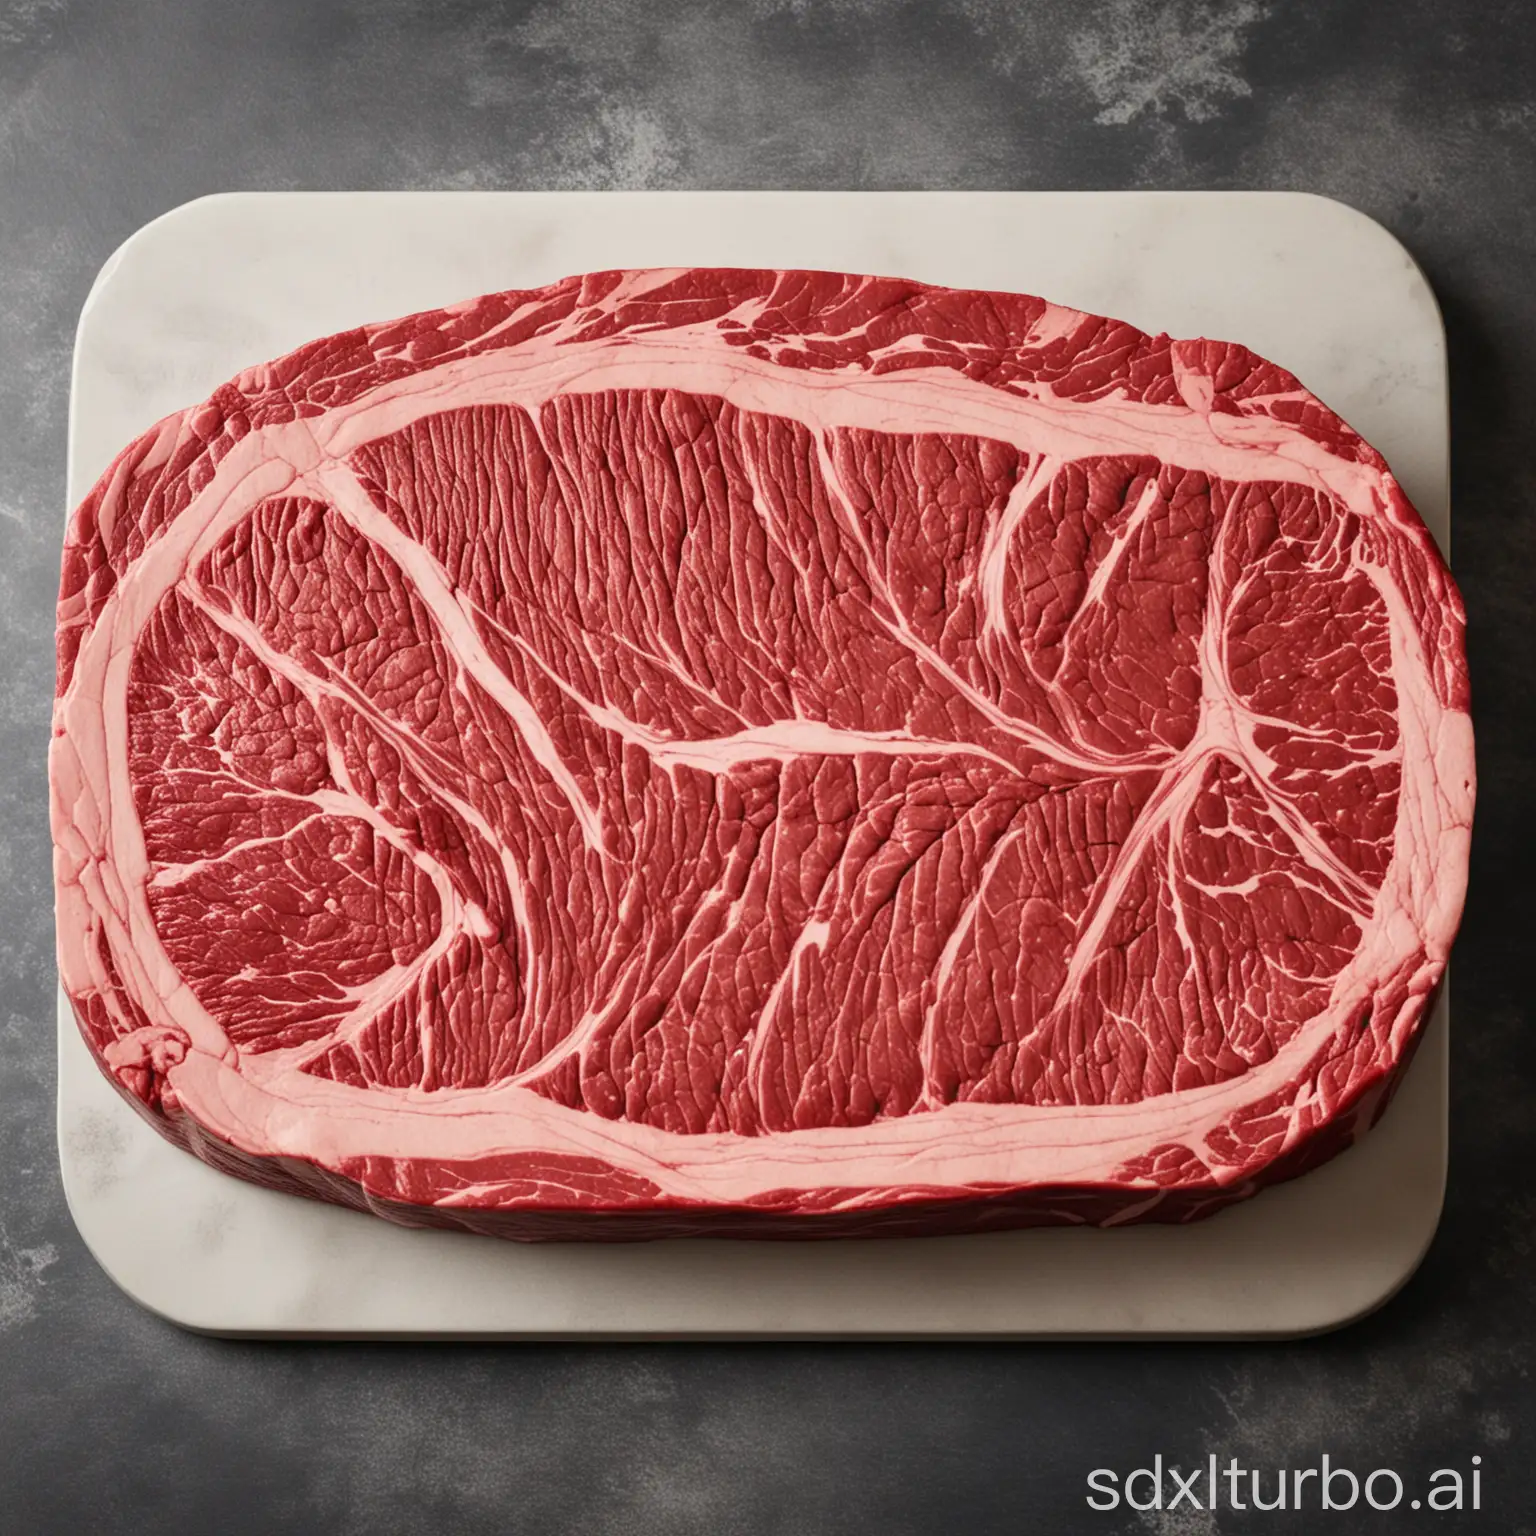 Sizzling-Marbled-Steak-on-Grilling-Plate-Succulent-Meat-Delight